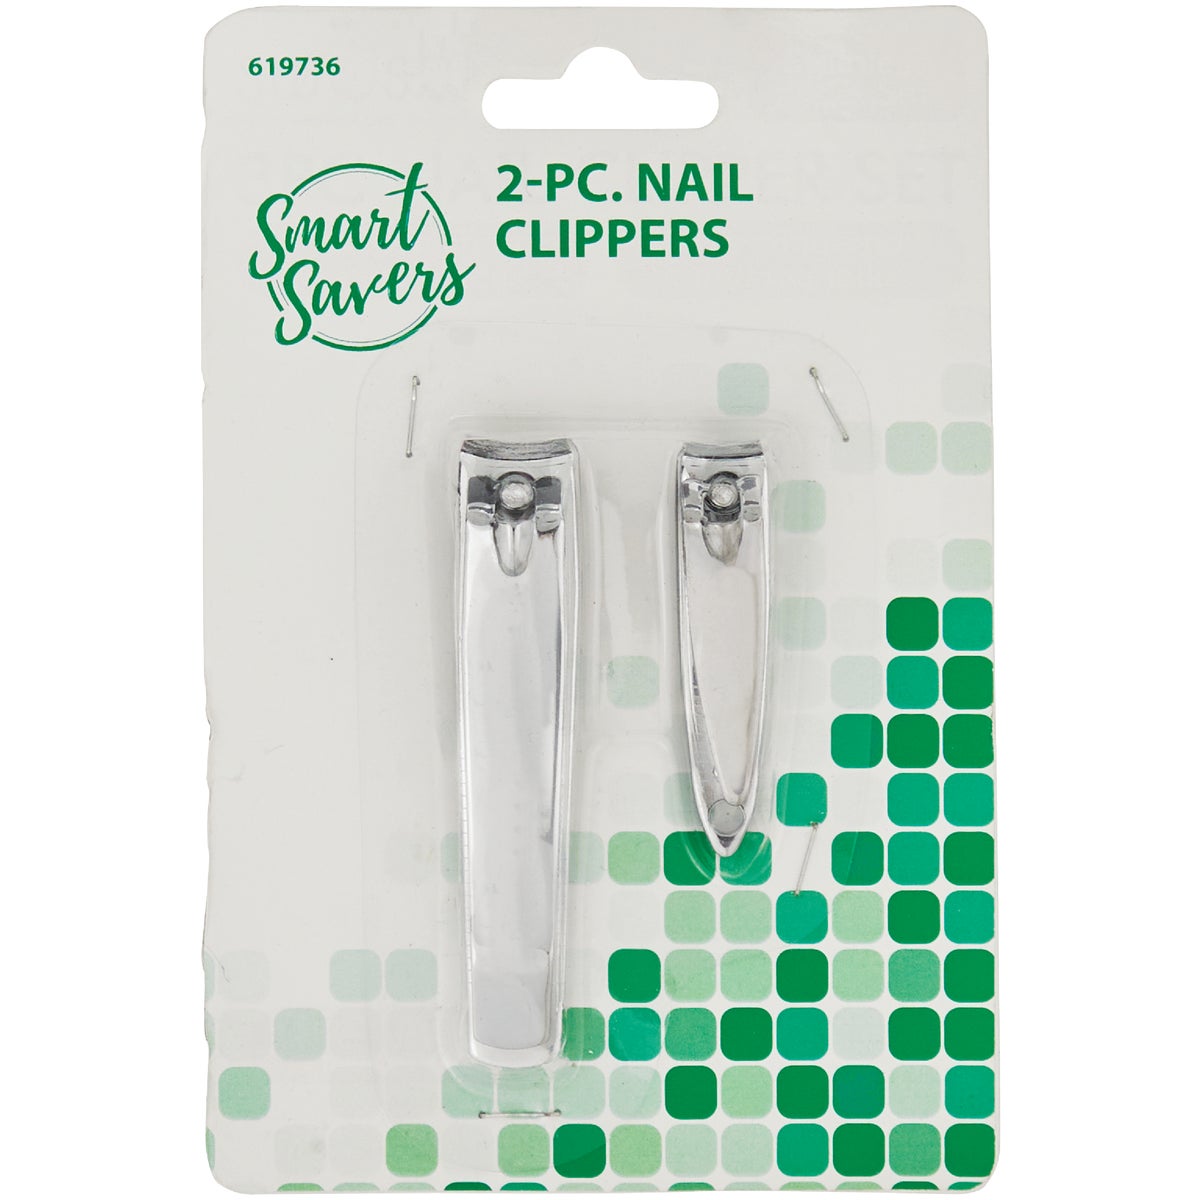 Item 619736, Smart Savers nail clipper. 1 large and 1 small nail clipper per pack.